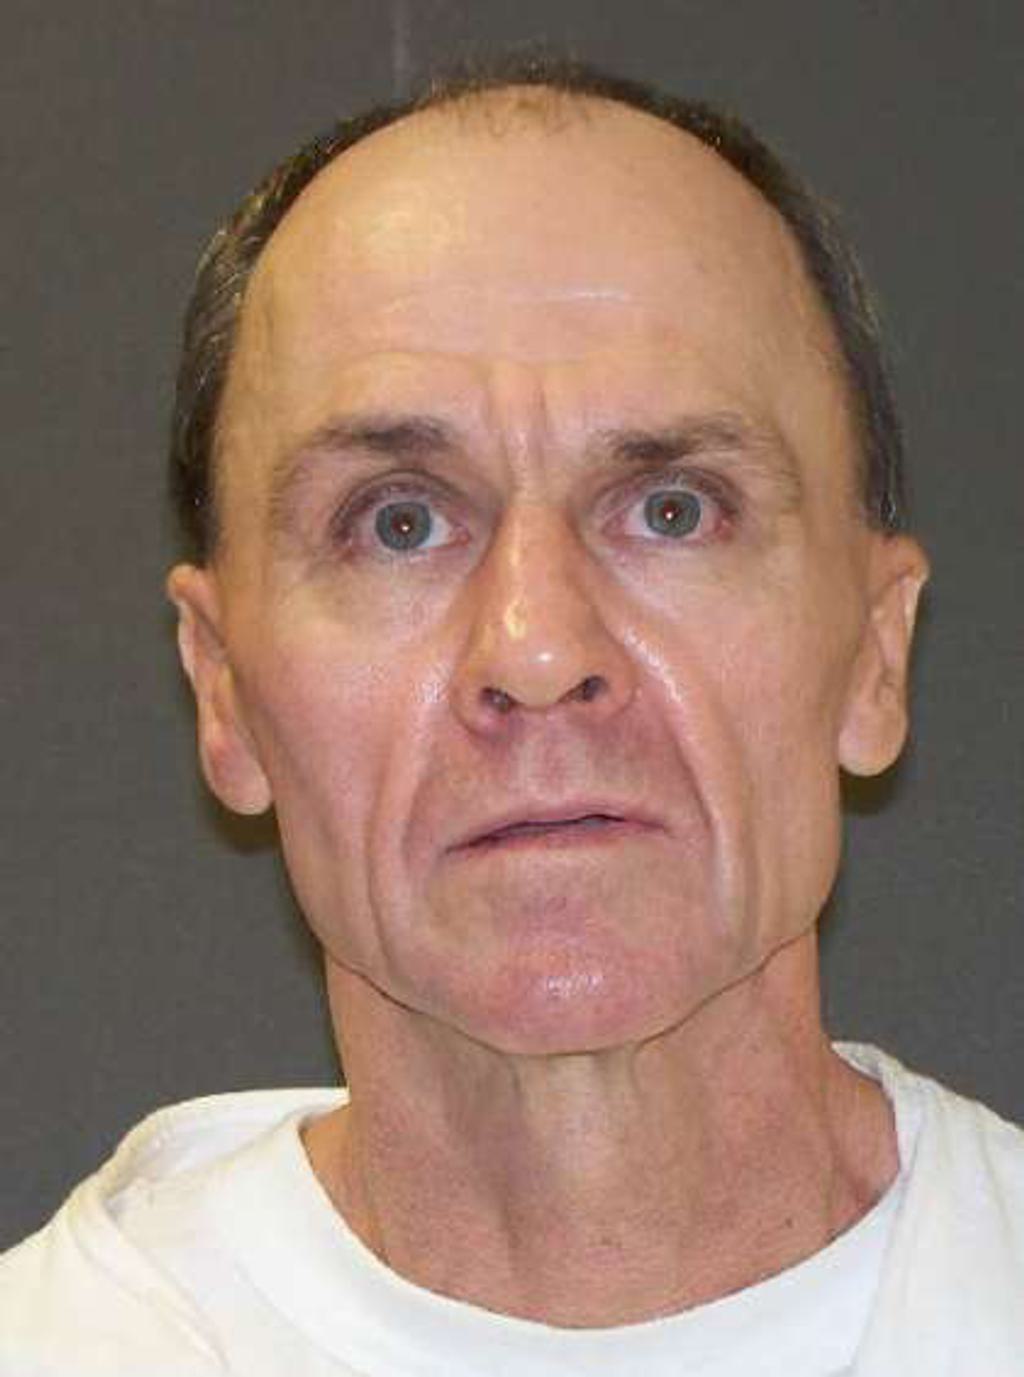 News Brief — Texas Appeals Court Stays Randall Mays' Execution on Issue of Intellectual Disability